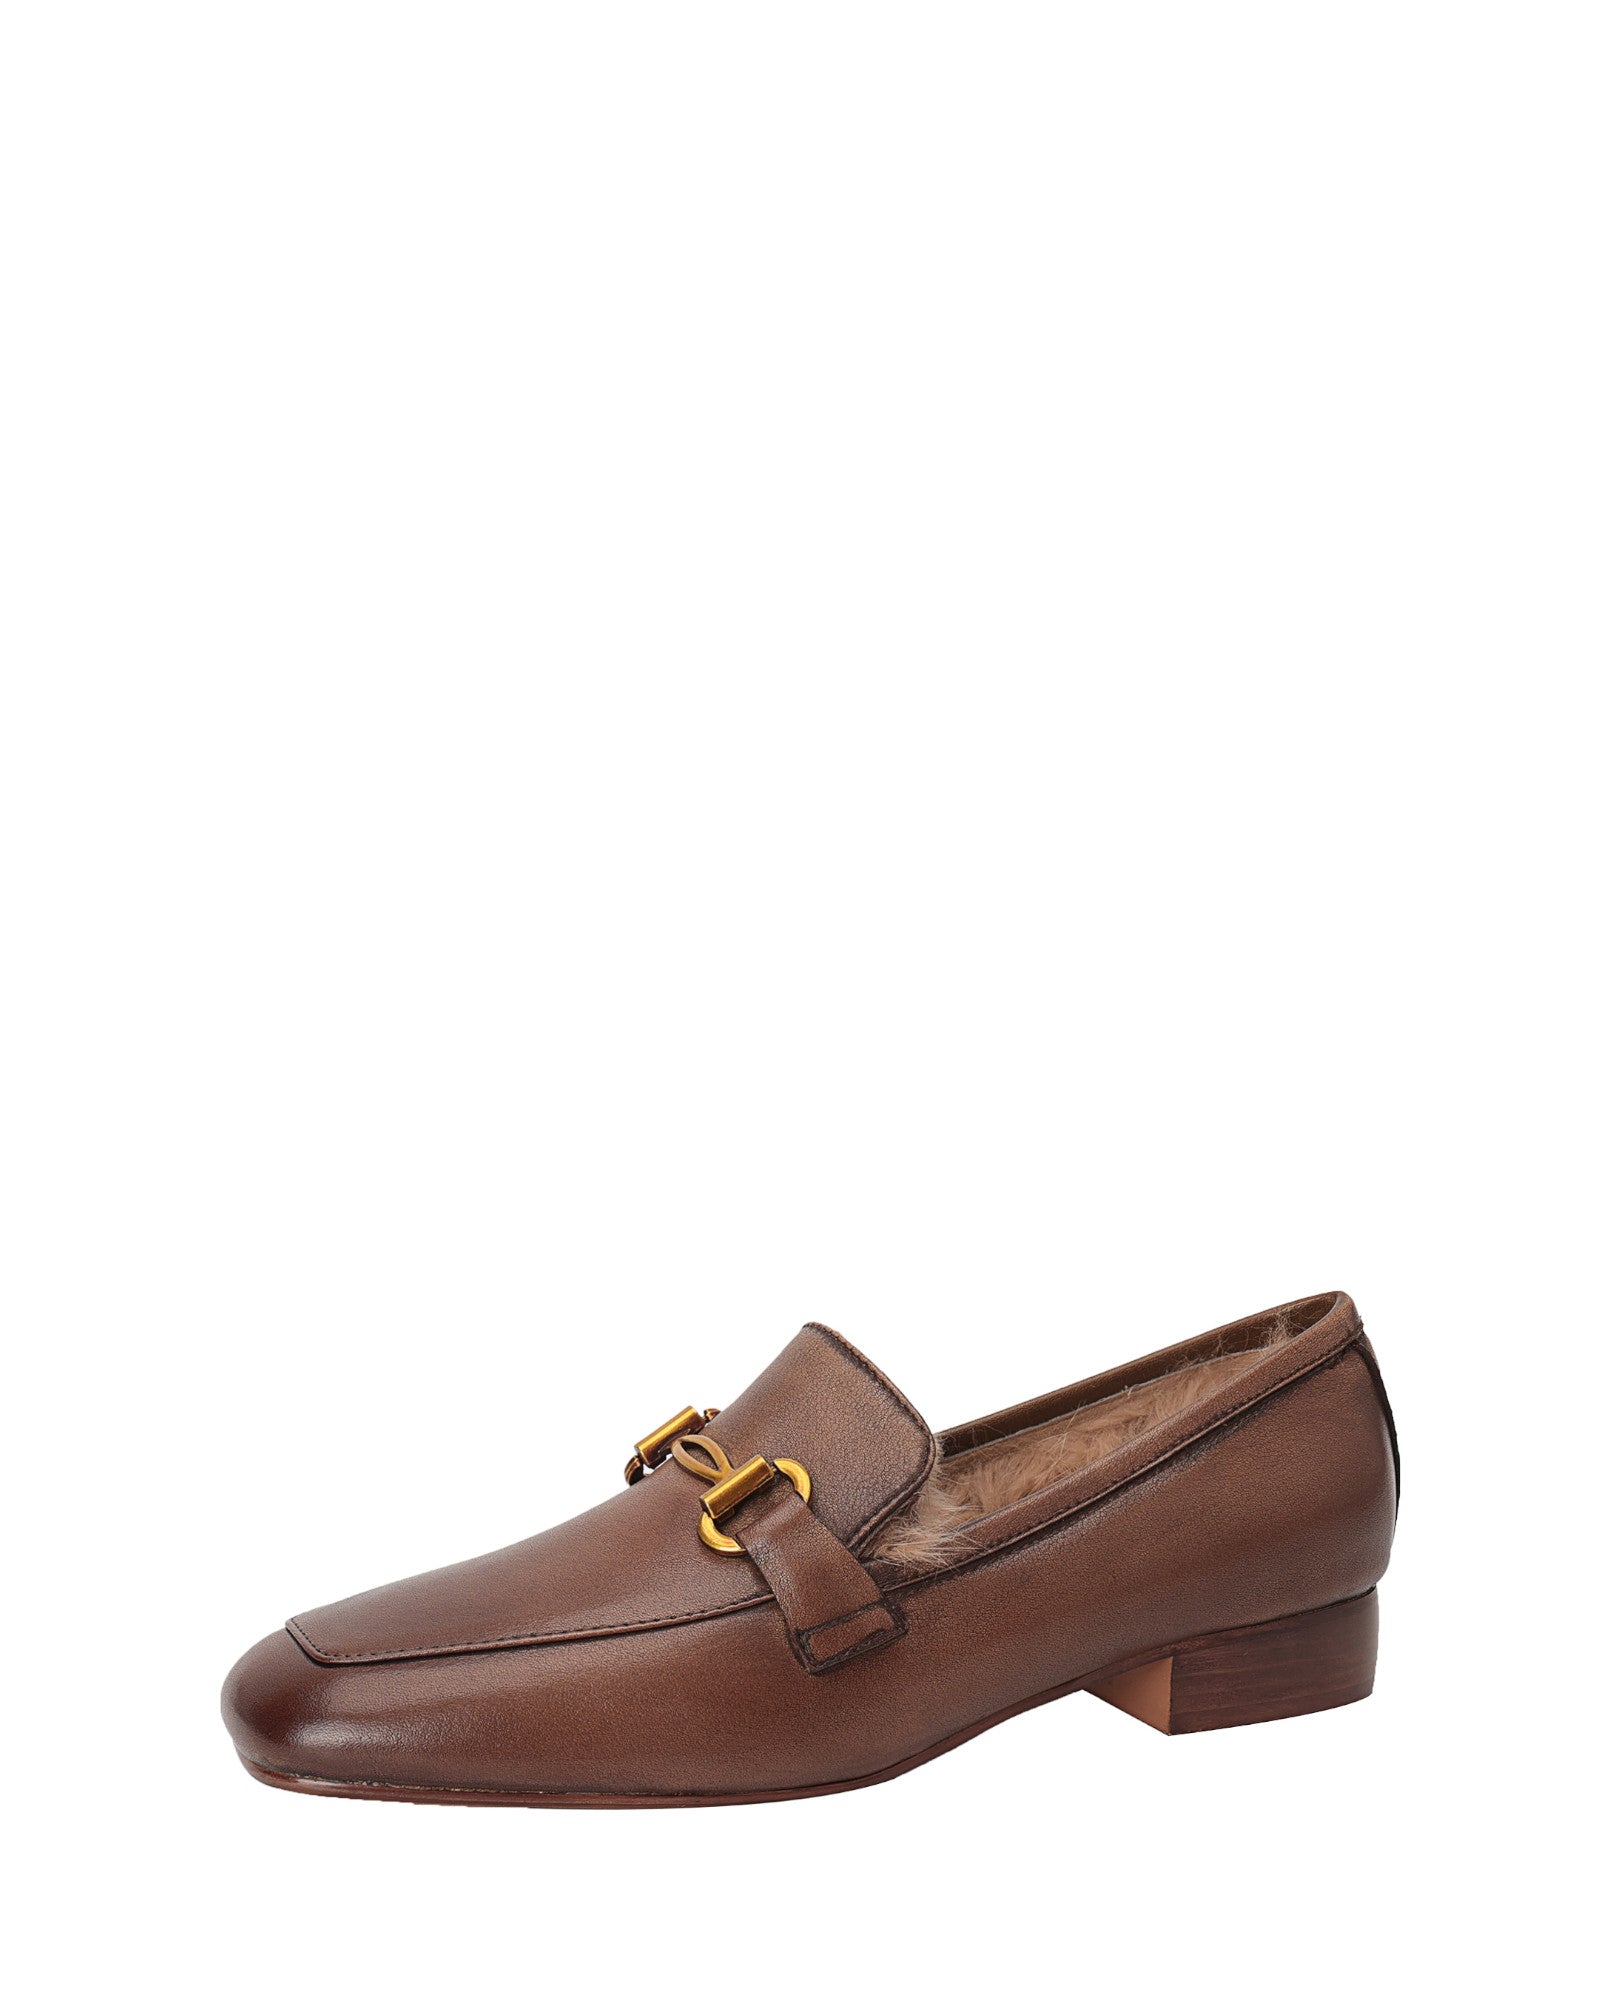 Hart-Fur-Lined-Brown-Leather-Loafers